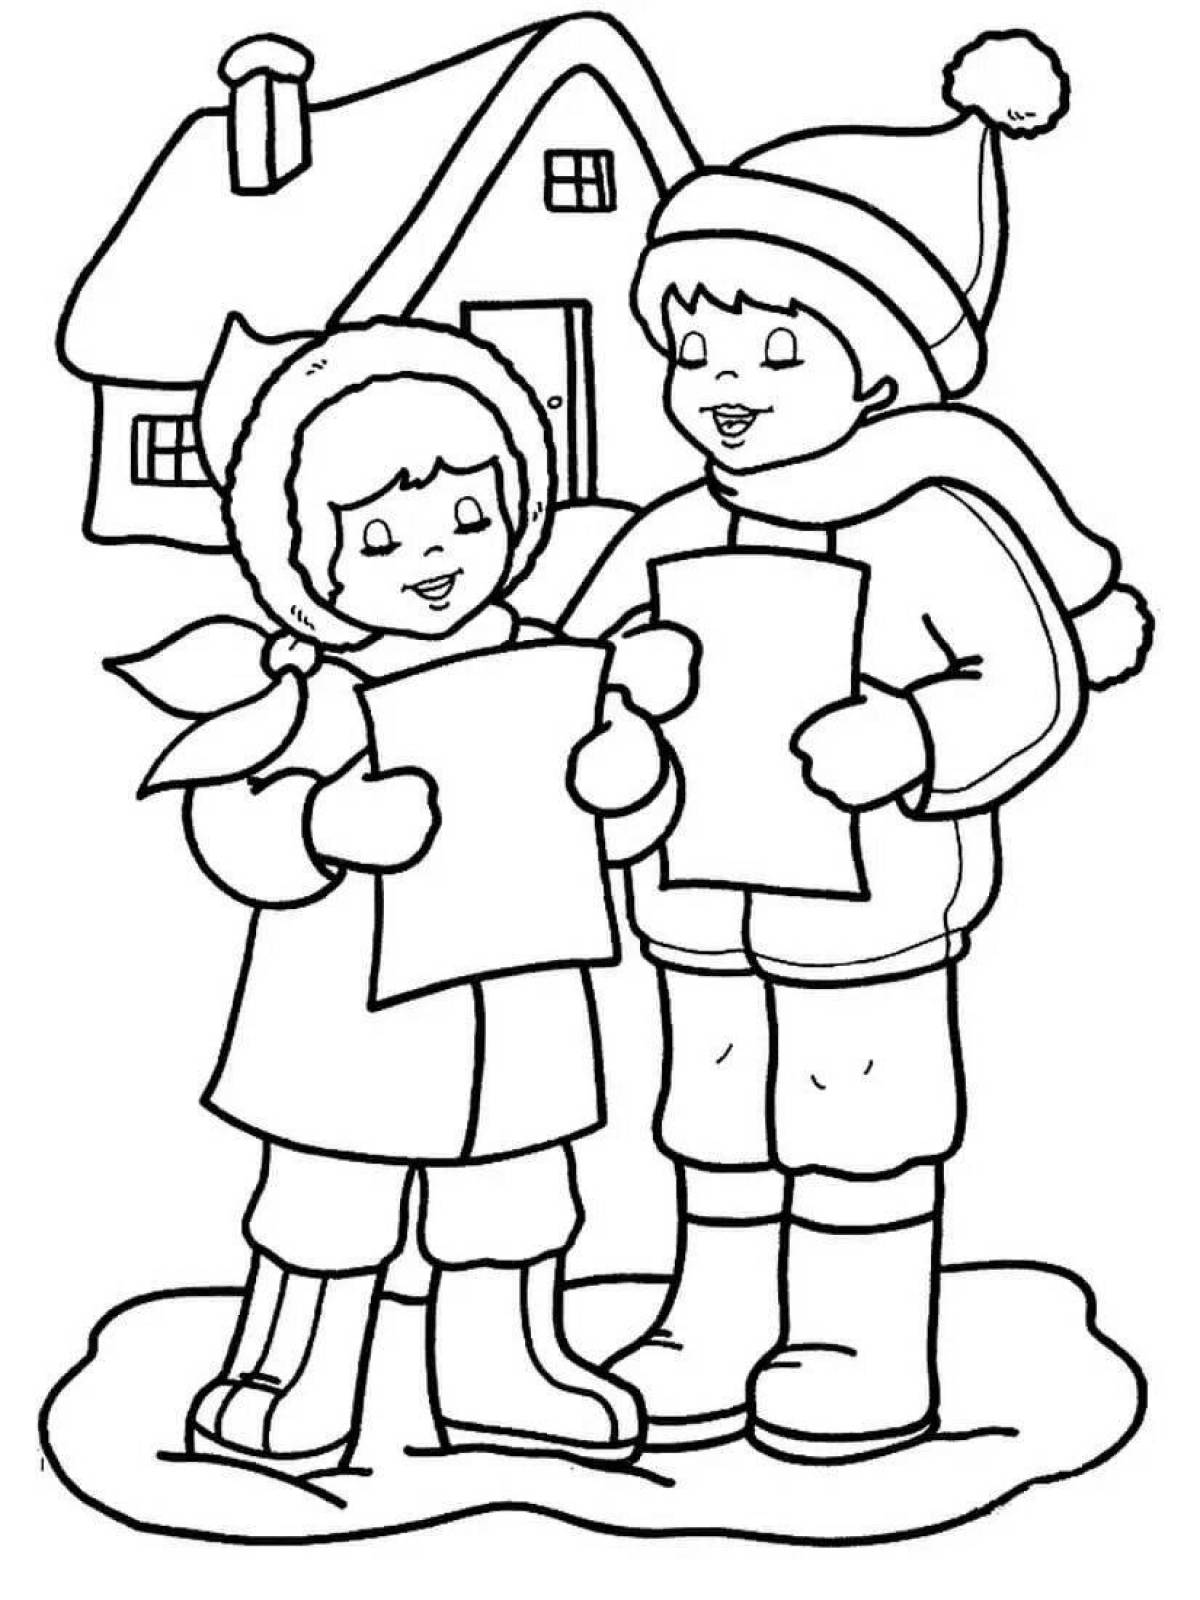 Sparkly carol coloring pages for preschoolers